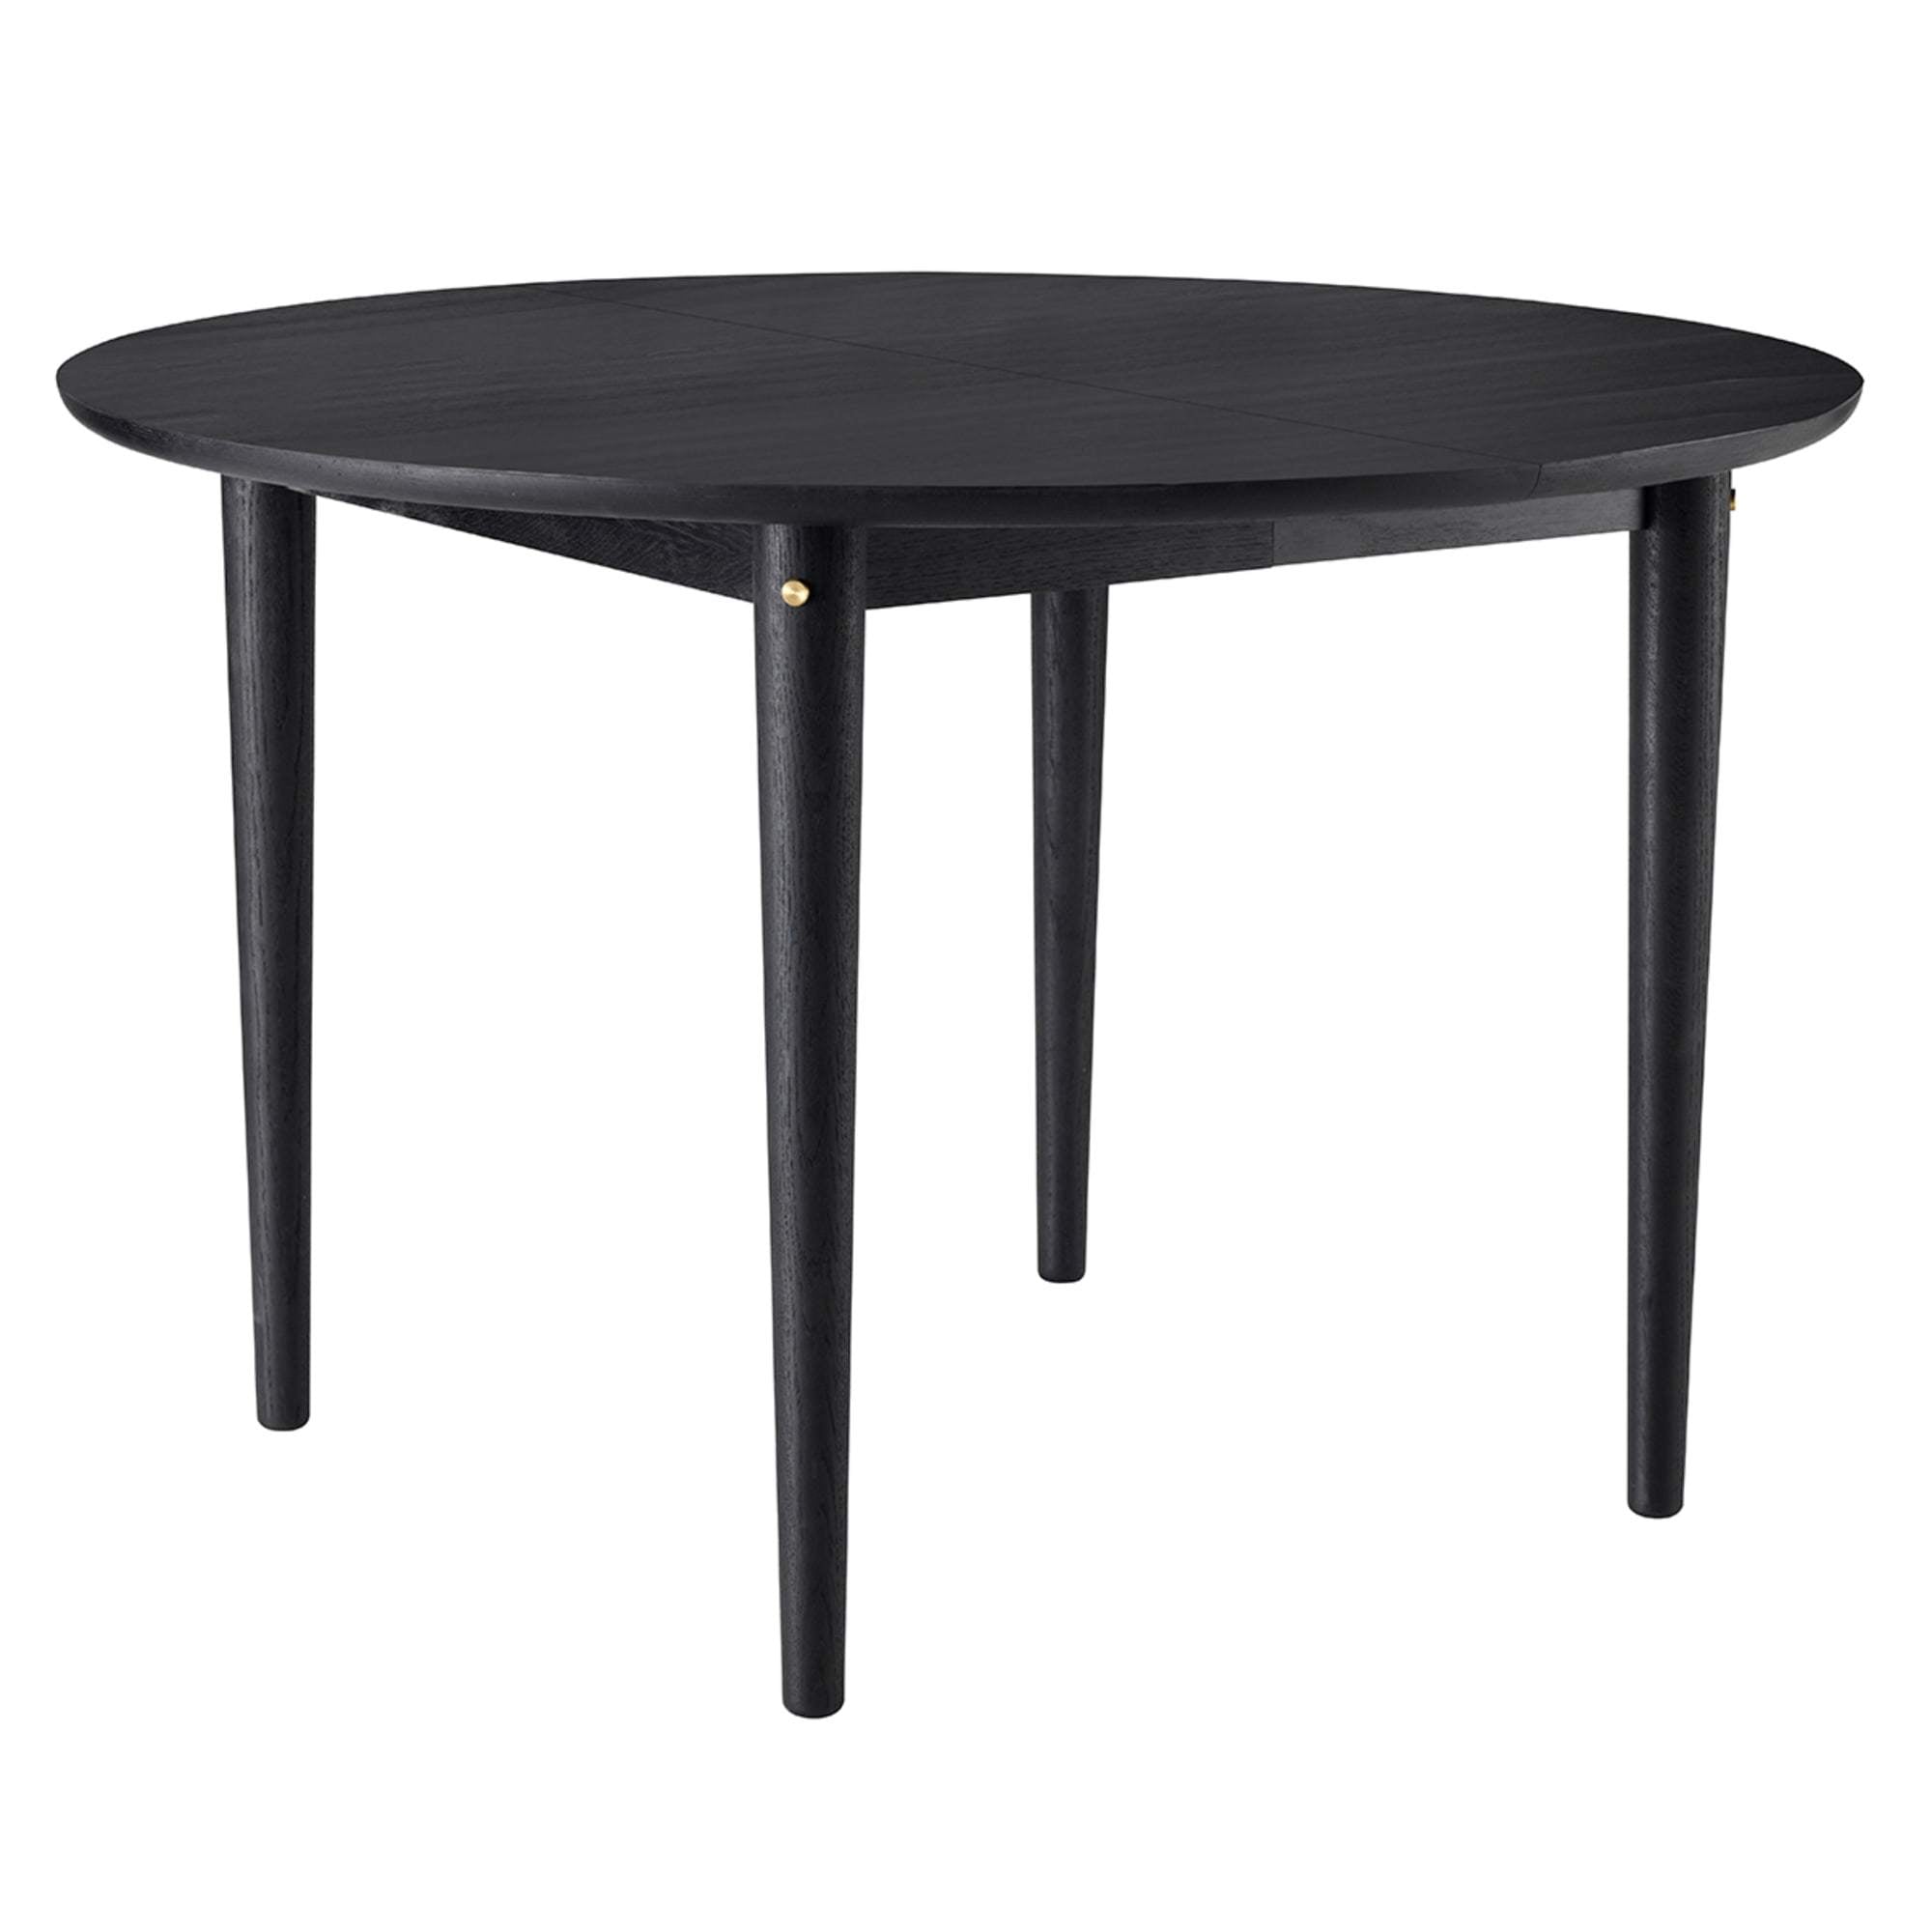 Fdb Møbler C62 E Dining Table With Pull Out Function, Black Oak